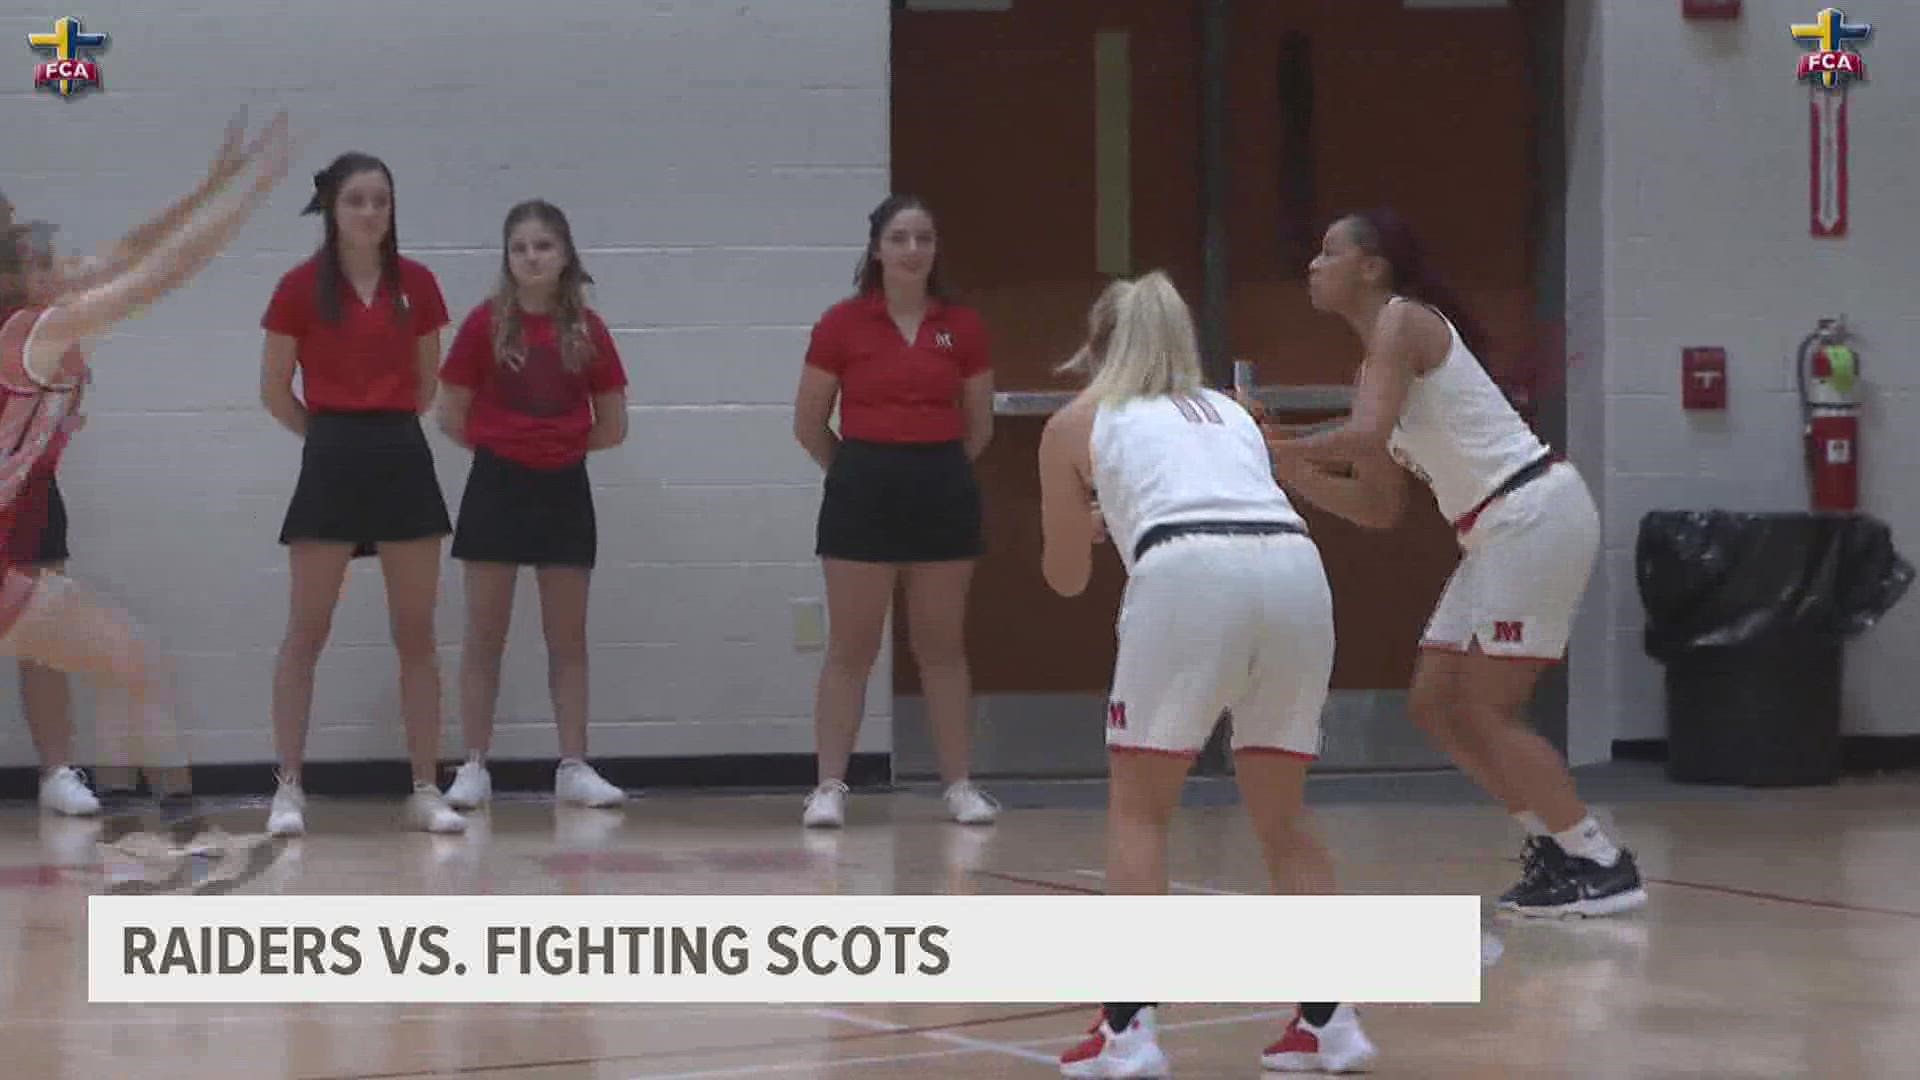 It's the third straight win for the Fighting Scot women as they pick up a 65-47 win over MSOE.